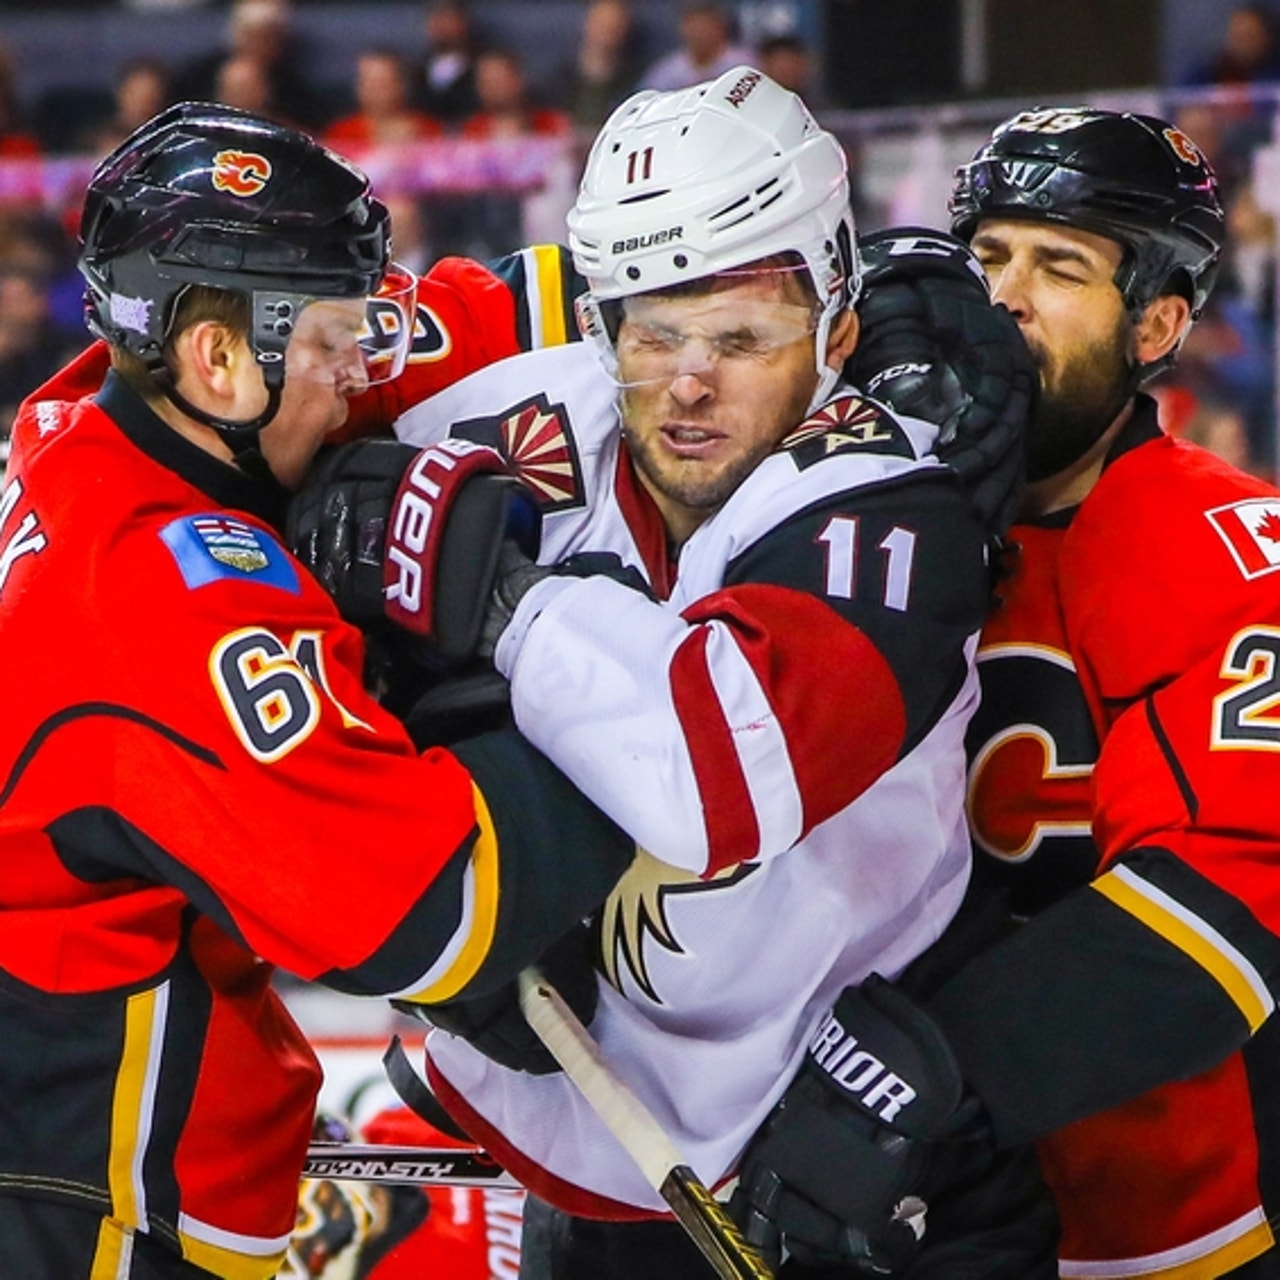 Jordan Martinook Signs with the Phoenix Coyotes - Vancouver Giants